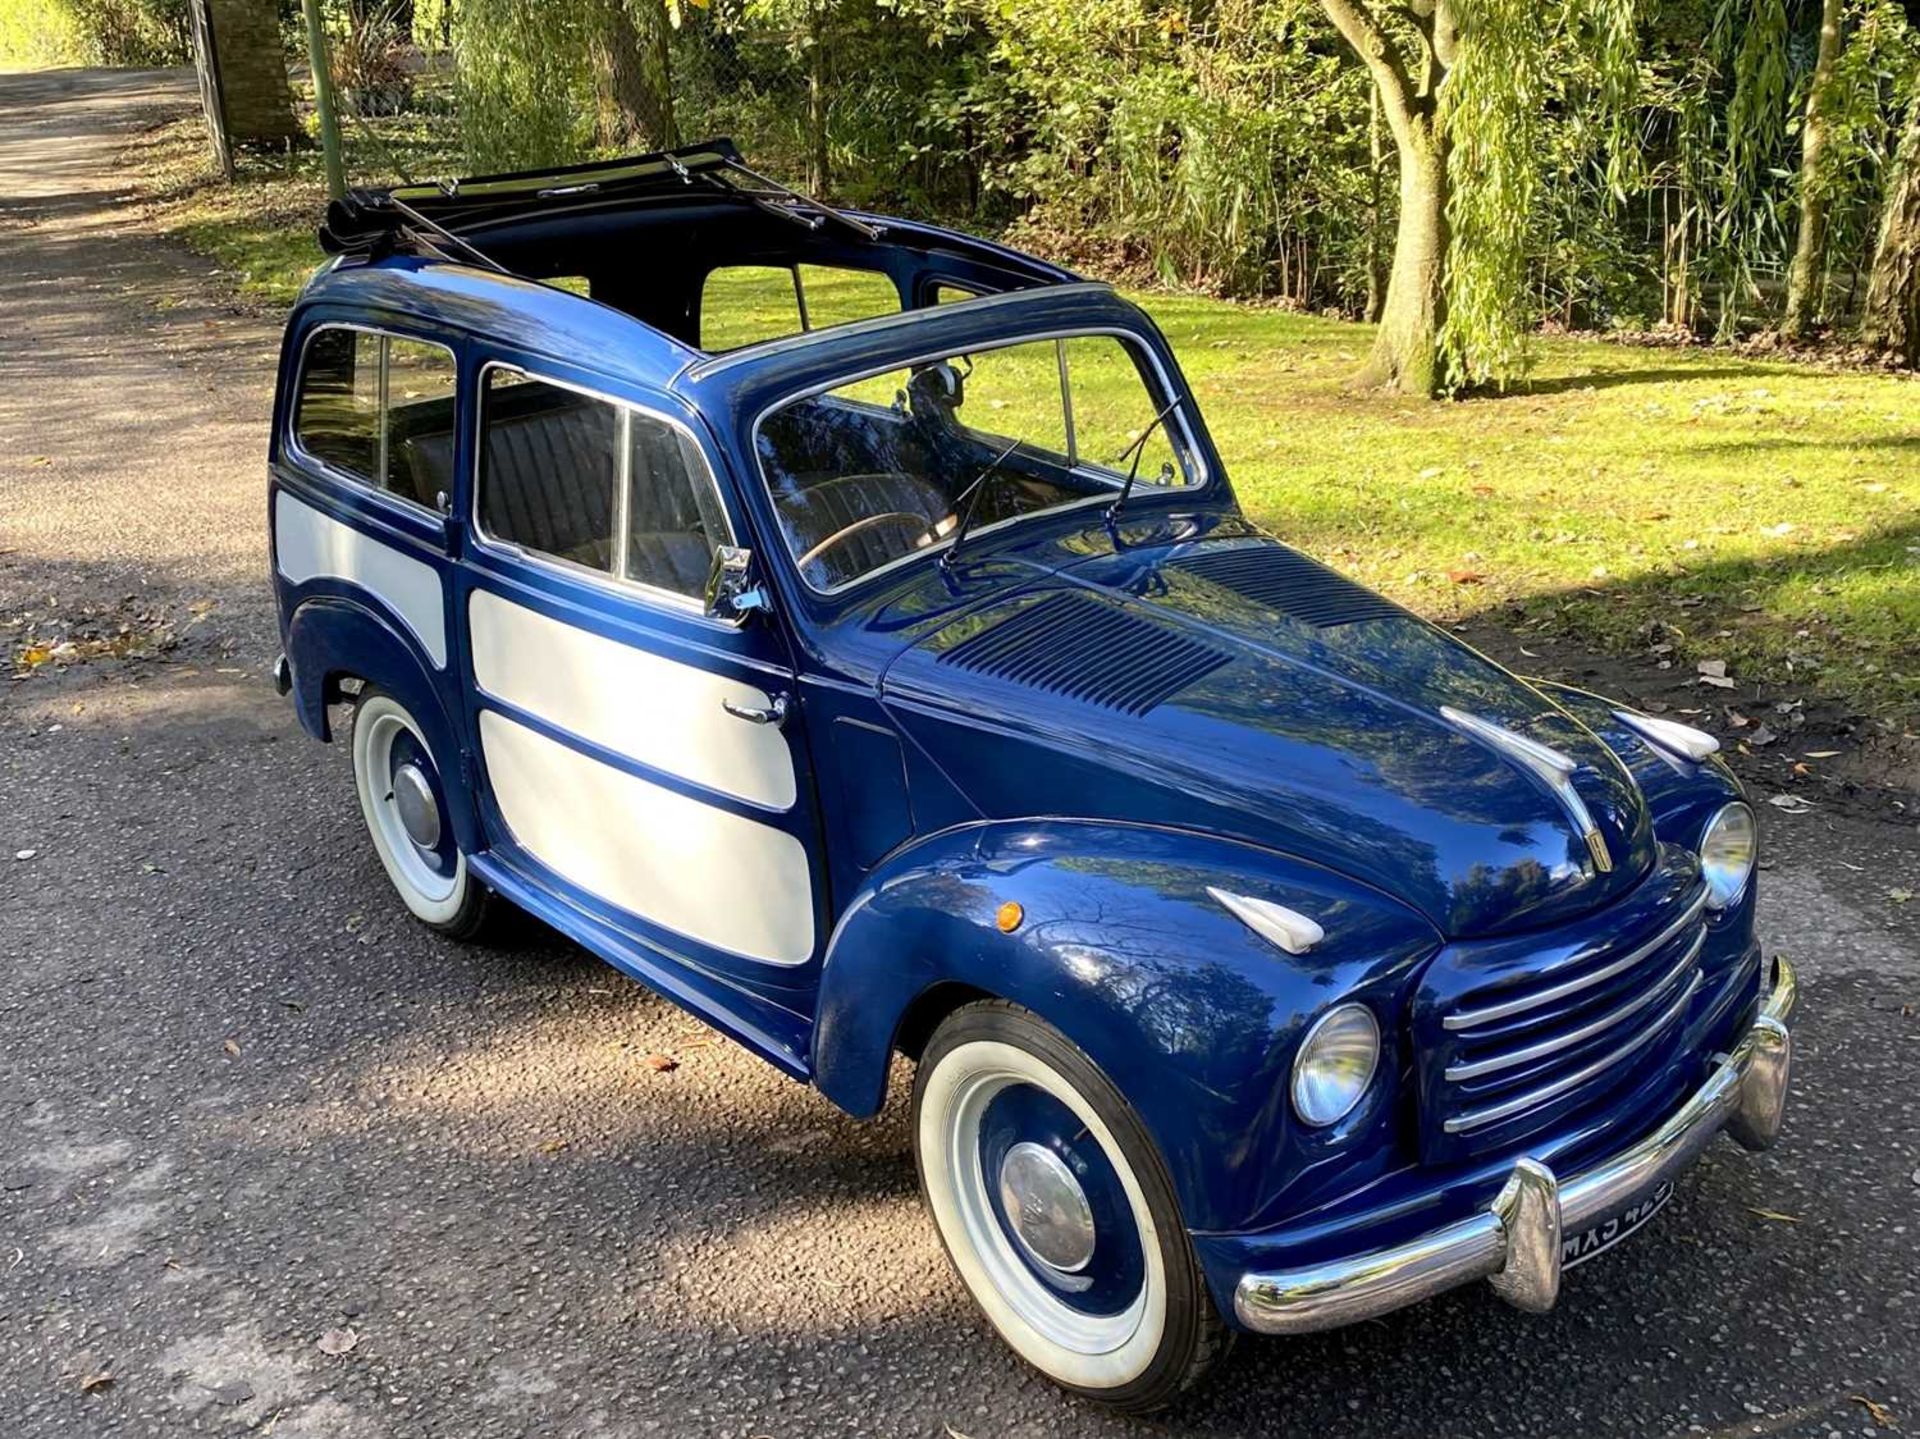 1952 Fiat Belvedere *** NO RESERVE *** One of only 60 RHD examples built - Image 9 of 99